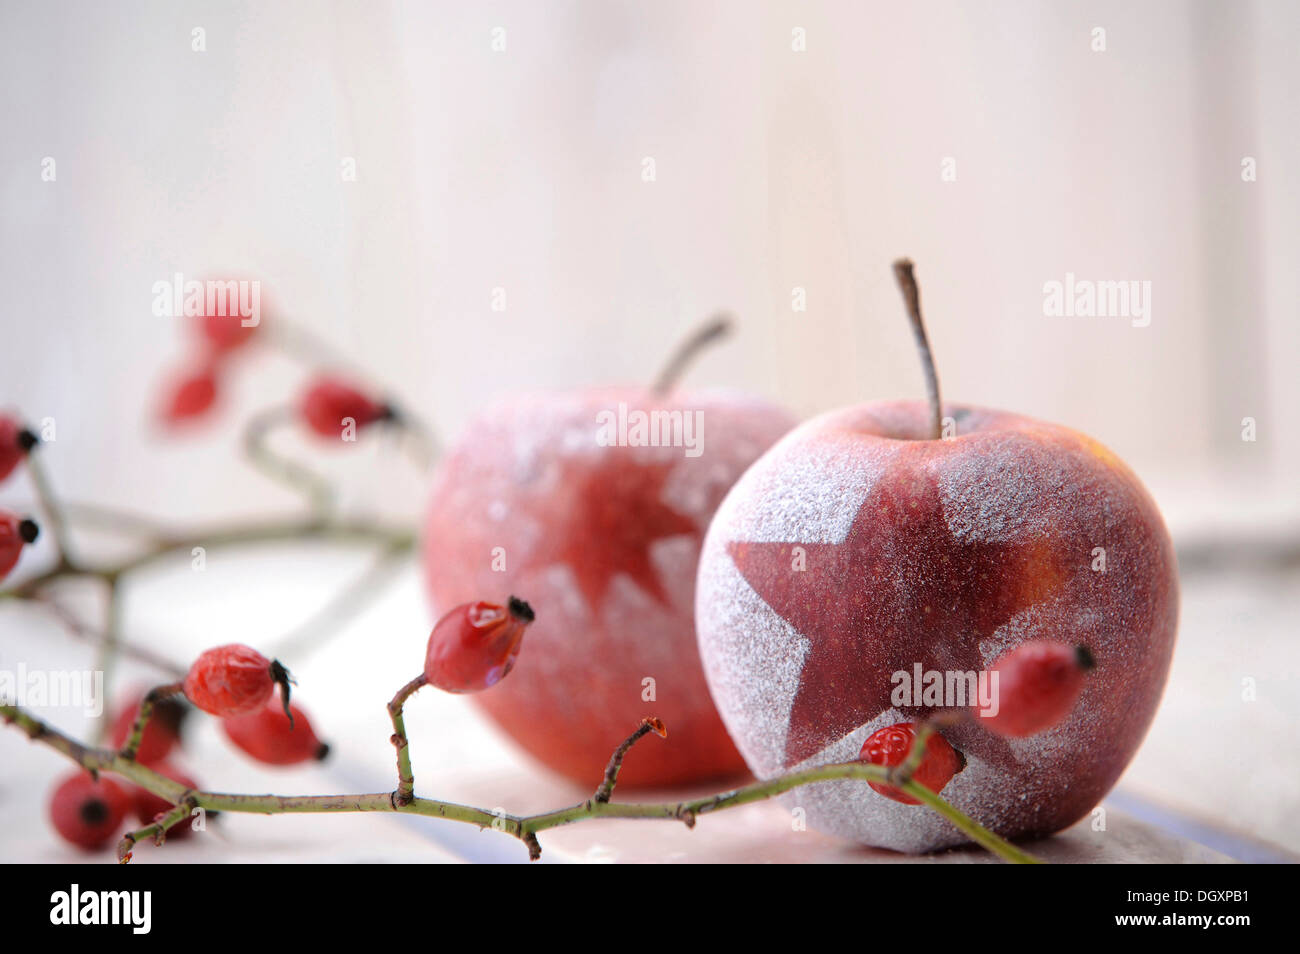 Christmas ambience with red apples and rosehips Stock Photo